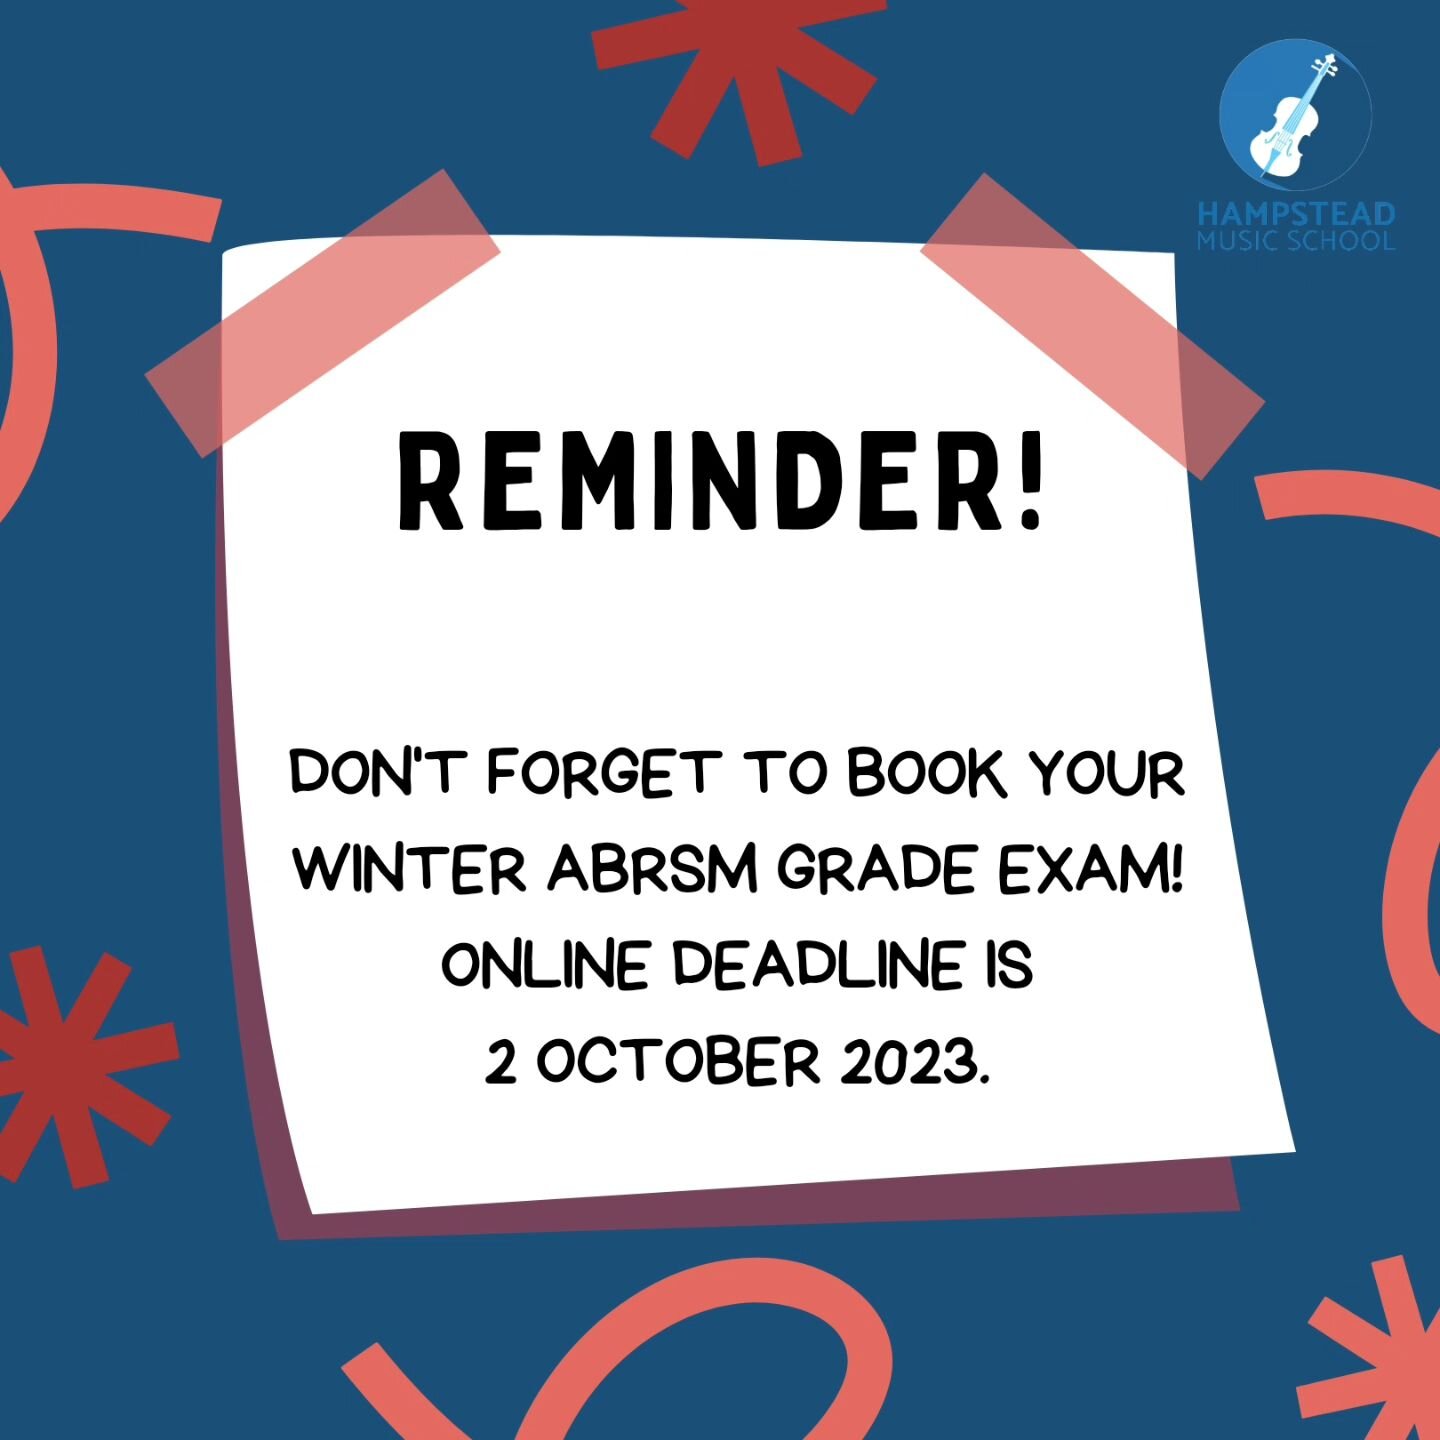 Don't forget to book your ABRSM practical exam. Online application deadline is the 2nd October. More info at abrsm.org. Good luck! 🤞🎵🎼

#abrsm #abrsmexam
#musicexam #hampstead